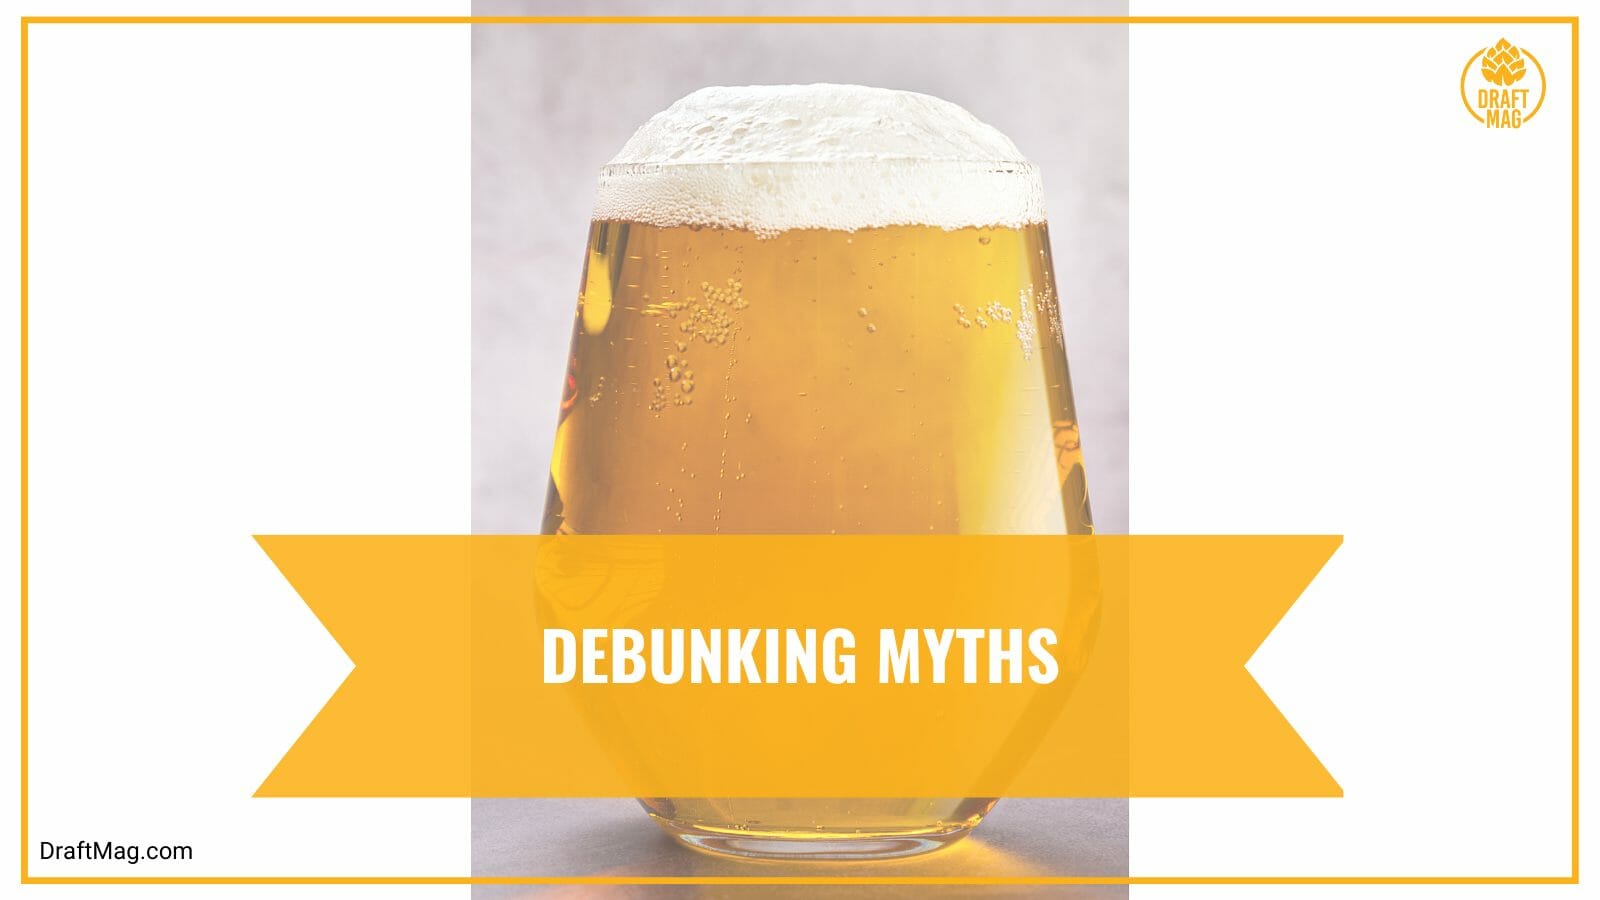 Debunking myths of mold in beer